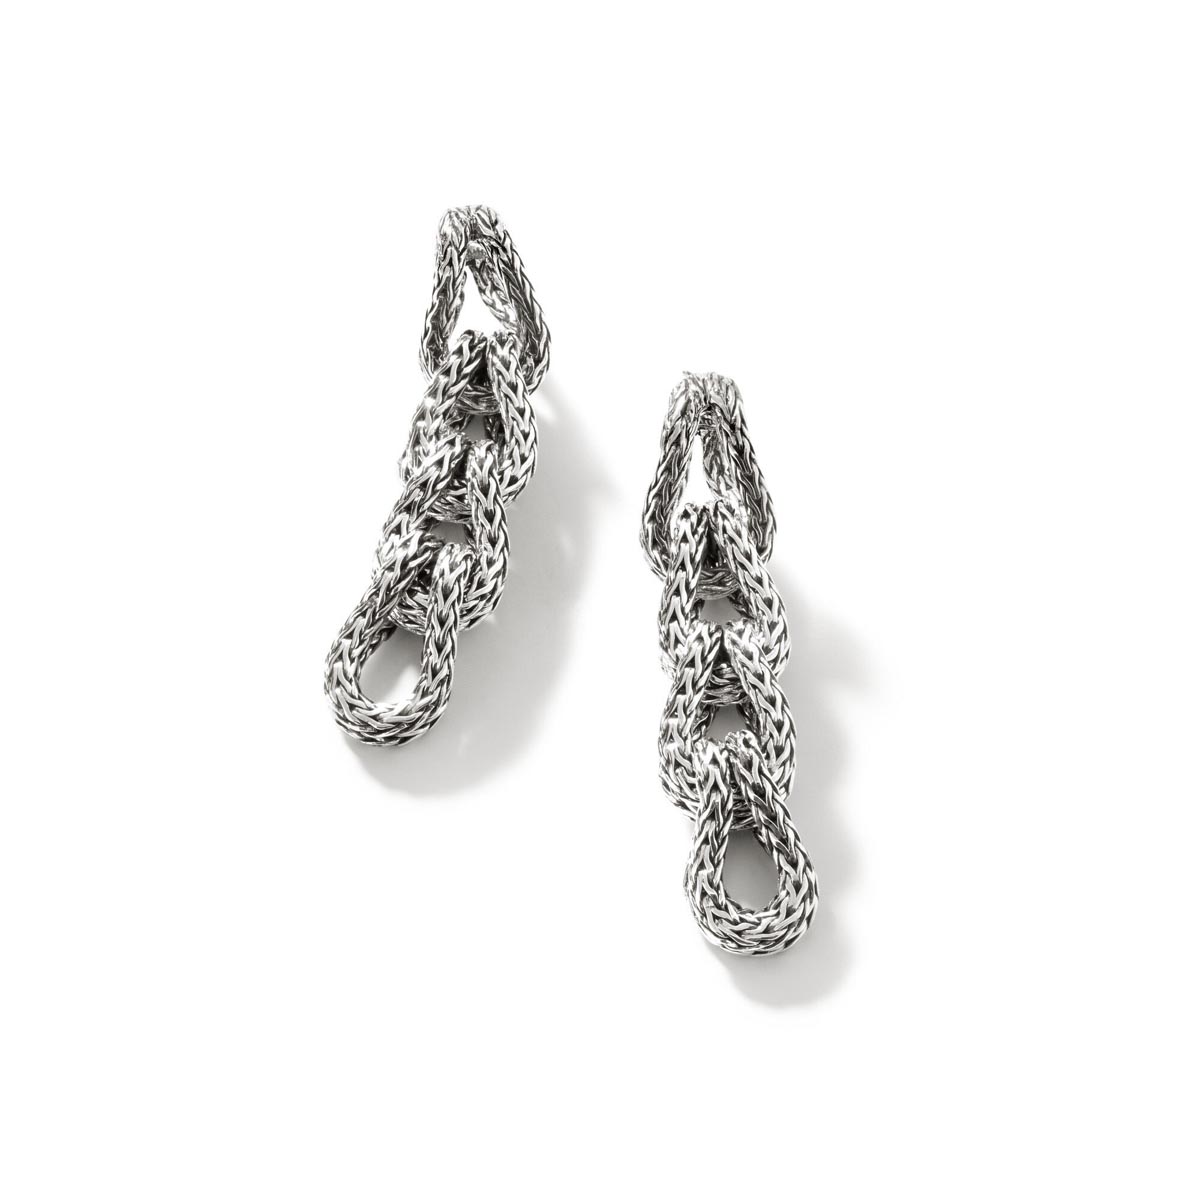 John Hardy Classic Chain Collection Asli Link Drop Earrings in Sterling Silver